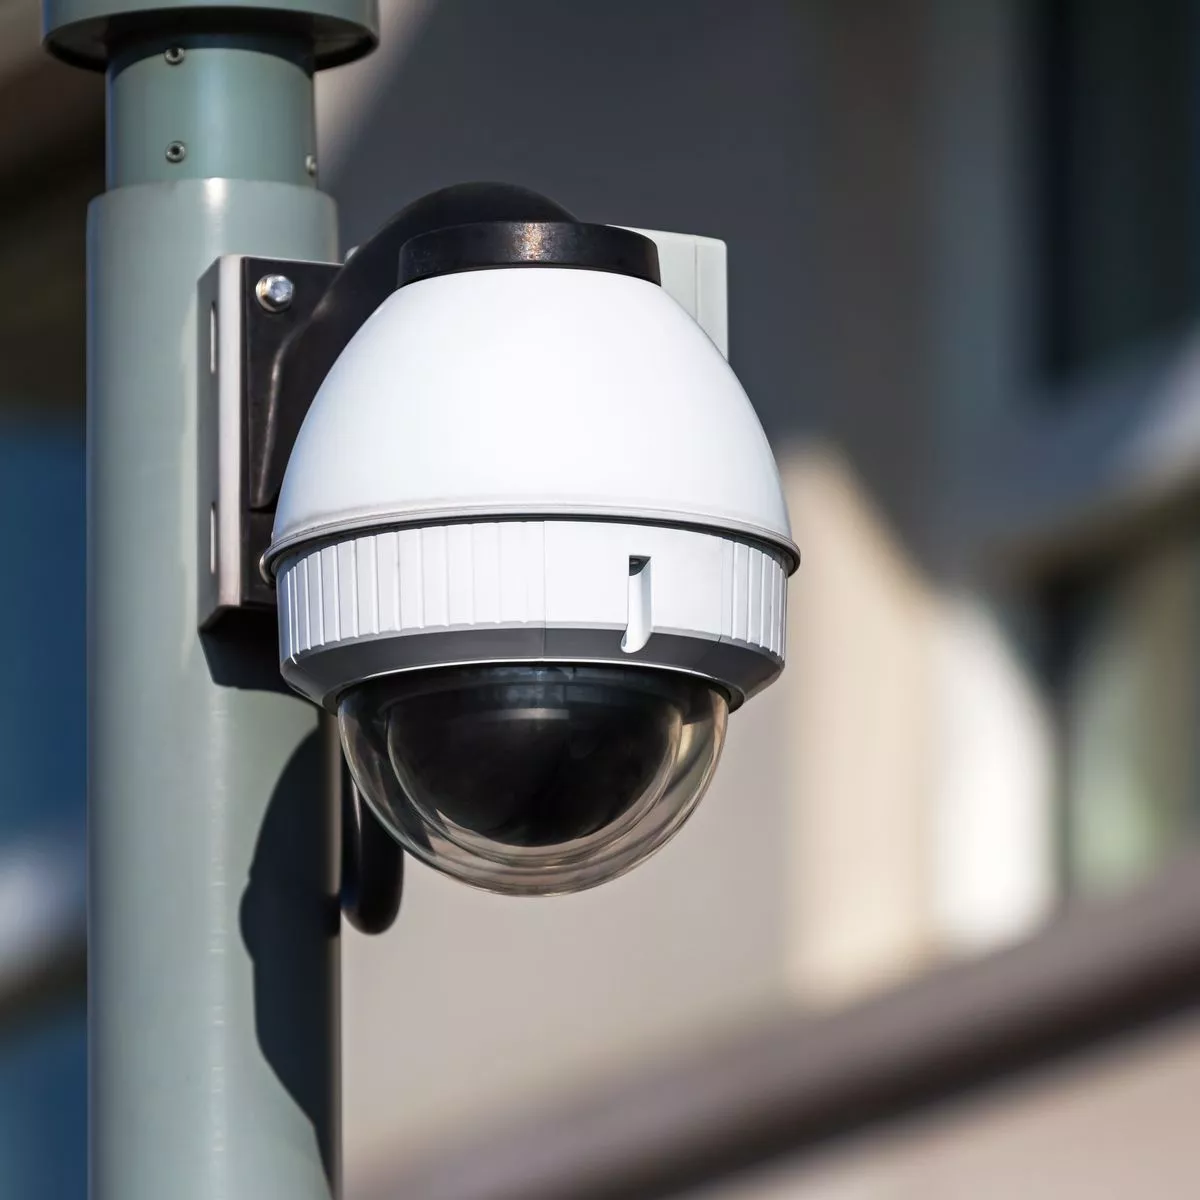 Building Security Camera System Installation: A Step-by-Step Guide